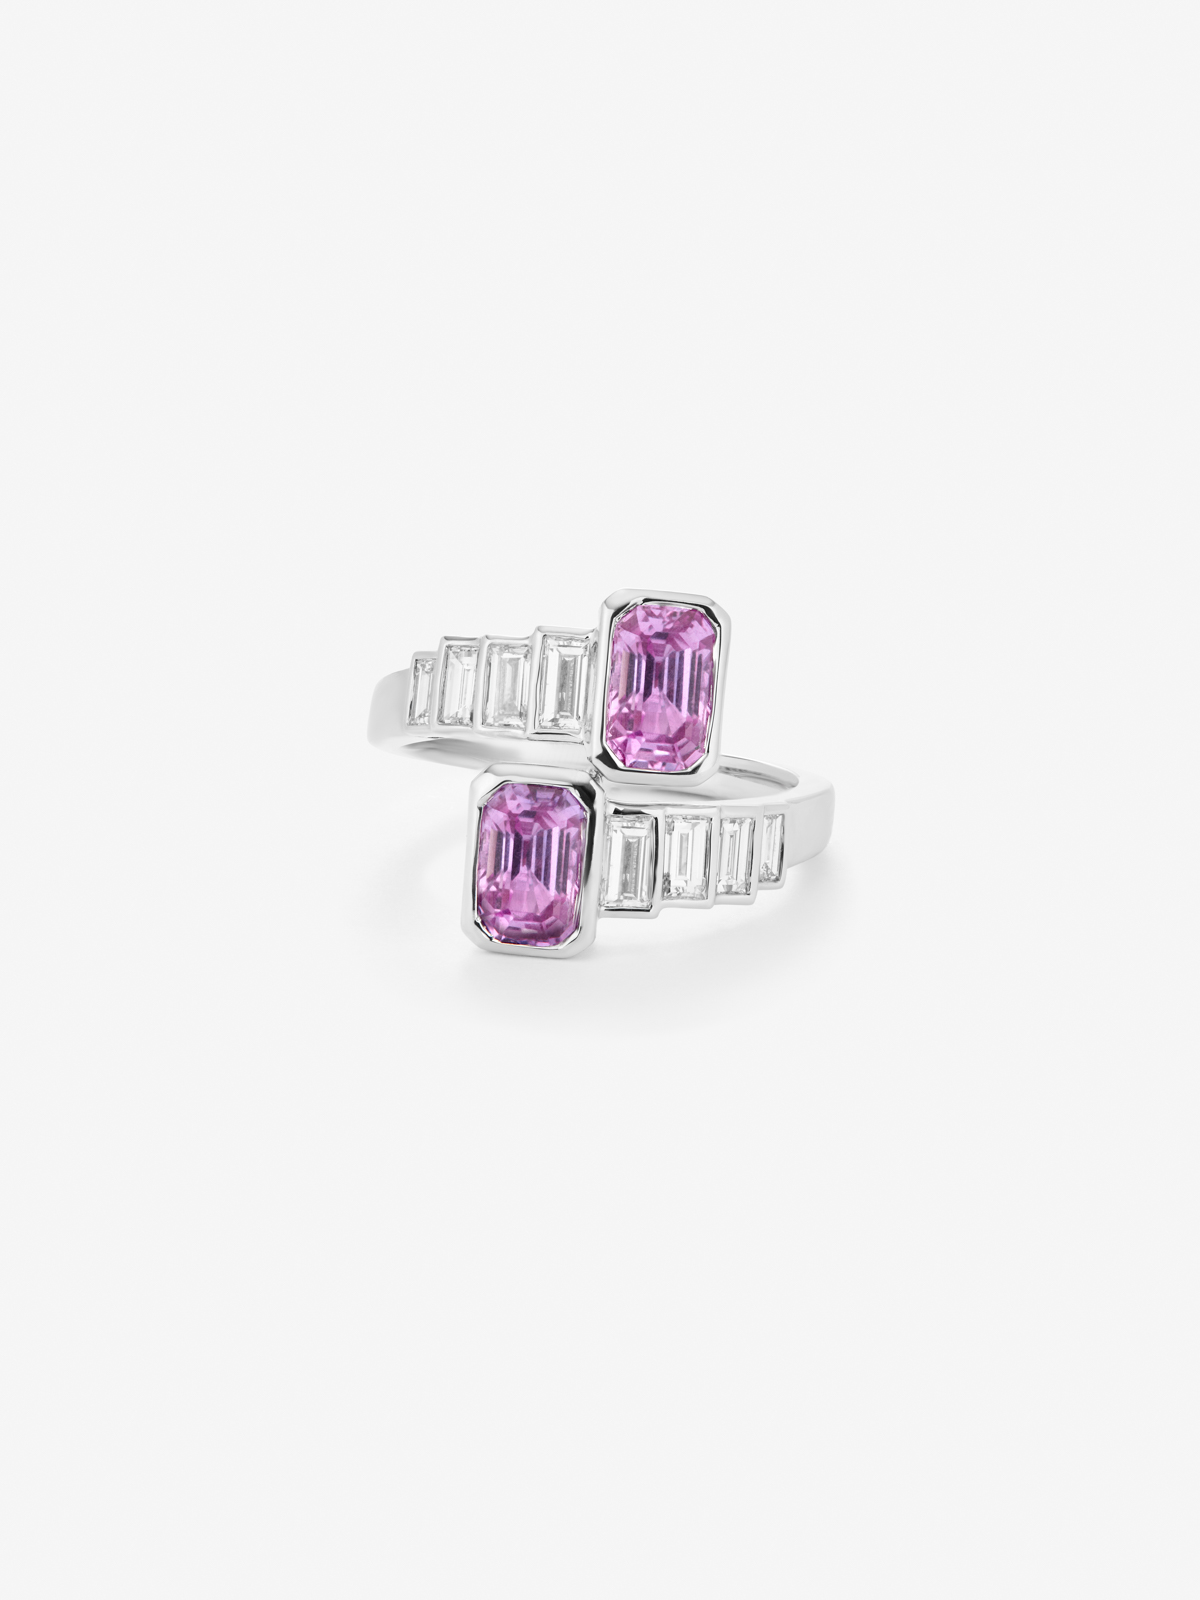 You and I 18k White Gold Ring with pink sapphires